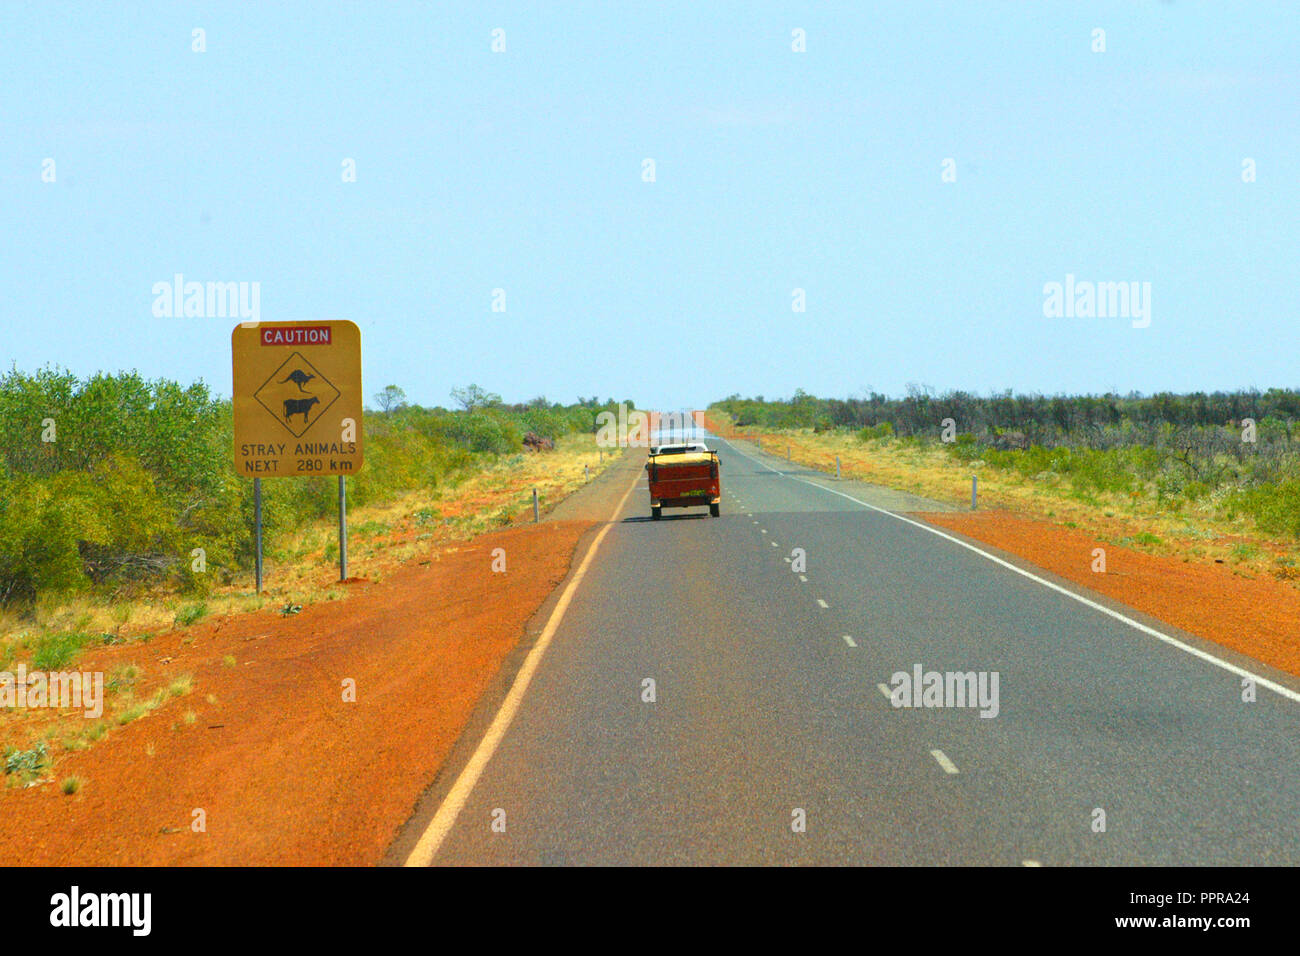 A vehicle on an outback road passes a stray animals road sign, outback Western Australia Stock Photo